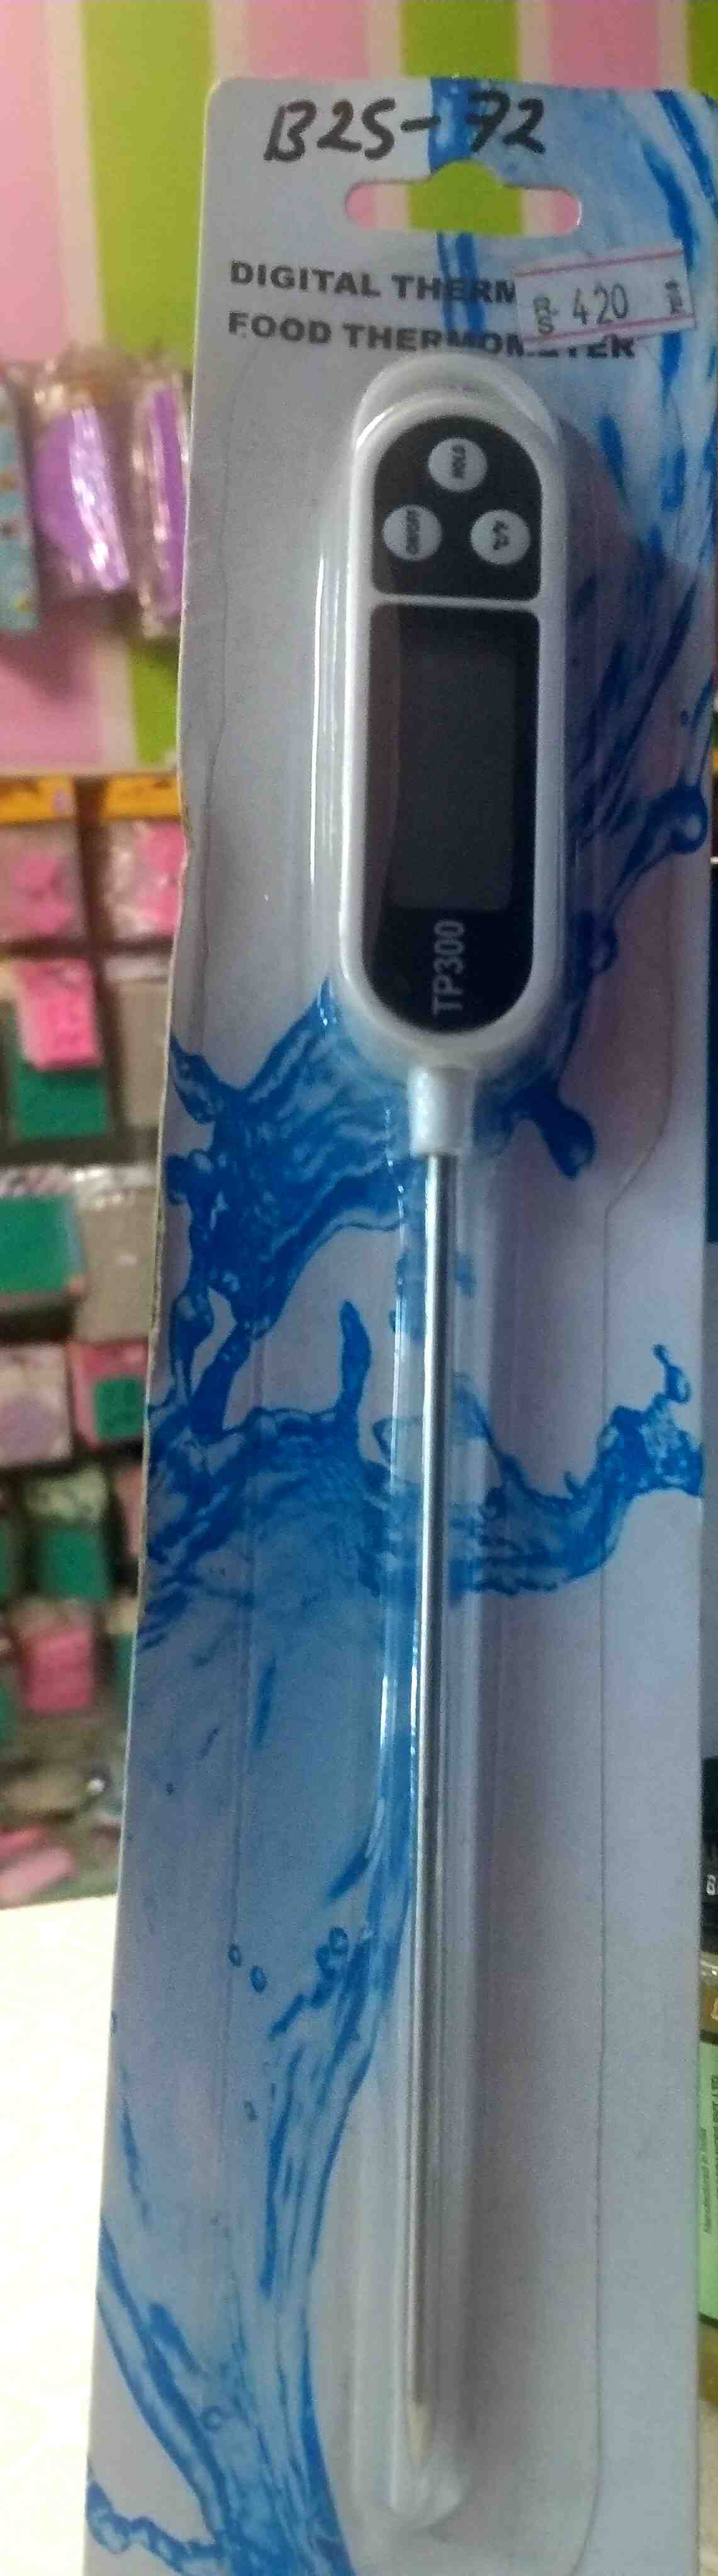 Digital Thermometer 2